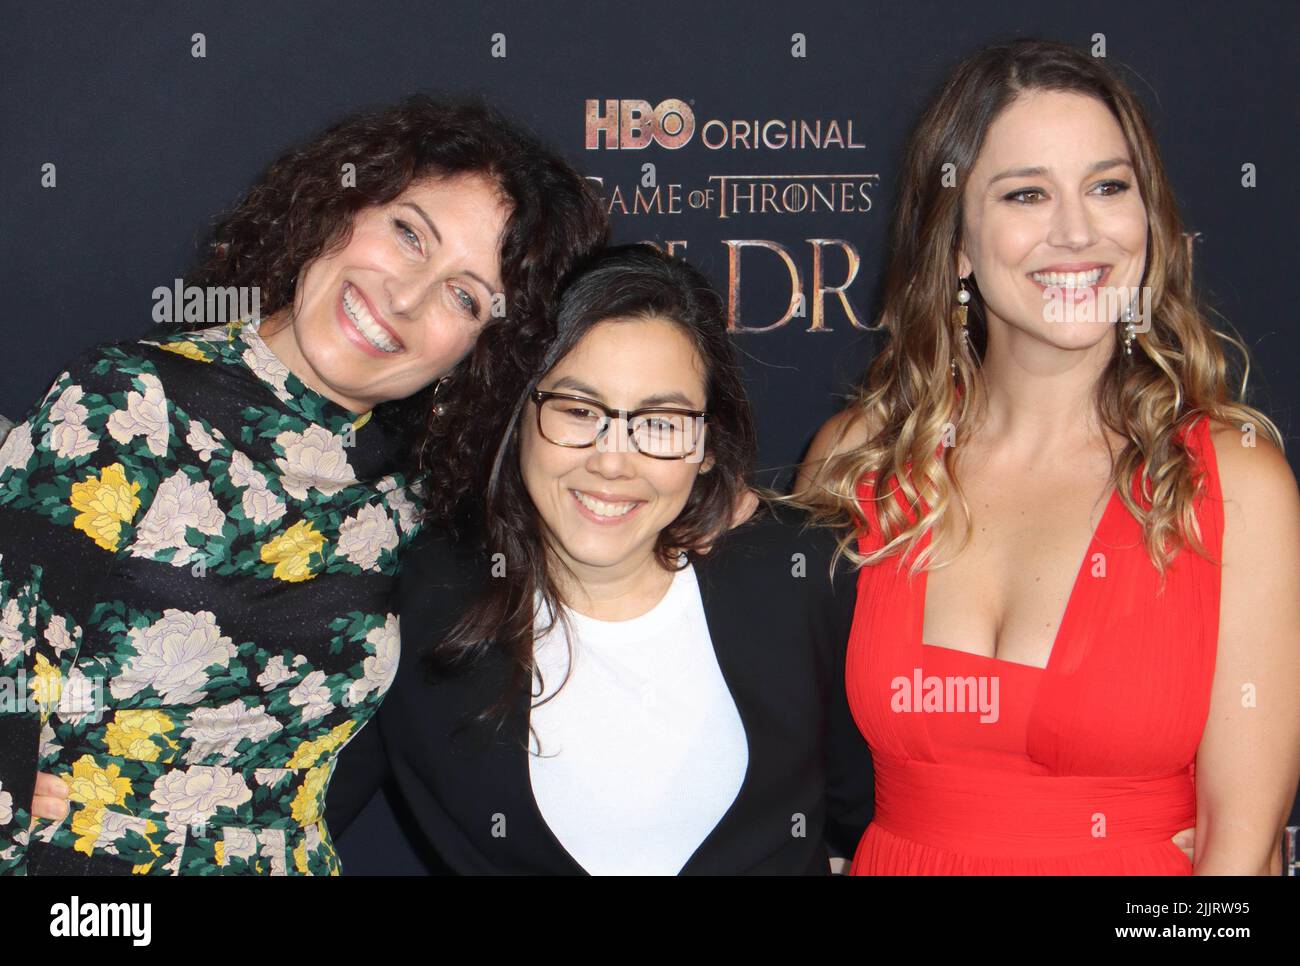 Los Angeles, USA. 27th July, 2022. Lisa Edelstein, Sara Hess, Talia Osteen 07/27/2022 The World Premiere of HBO Original Drama Series House of the Dragon at the Academy Museum of Motion Pictures in Los Angeles, CA Photo by Izumi Hasegawa/HollywoodNewsWire.net Credit: Newscom/Alamy Live News Stock Photo